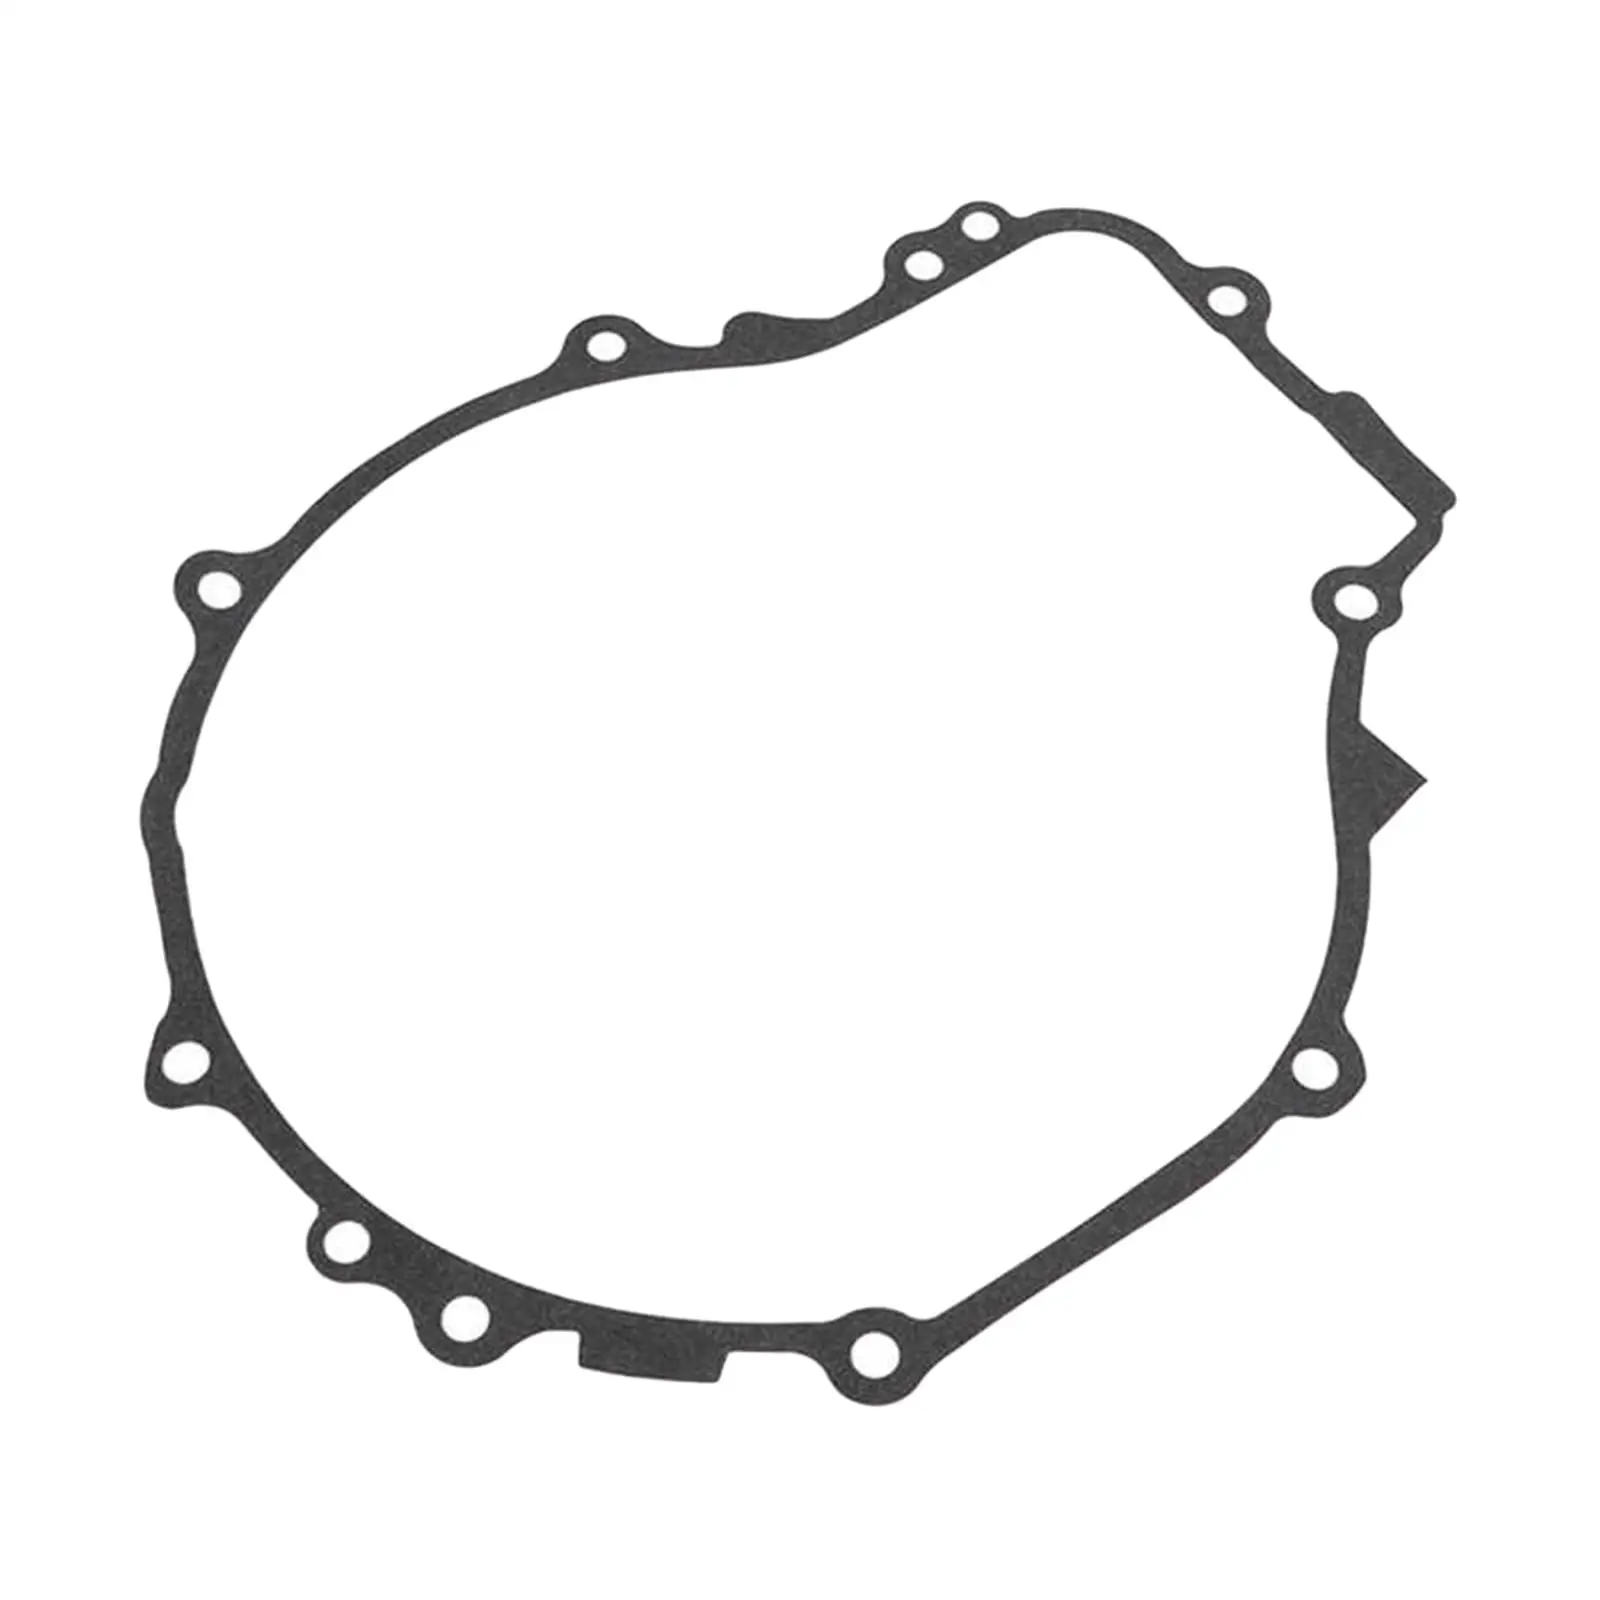 Automotive Pull Start Gasket 3084933 for Polaris Sportsman 500 Replacement